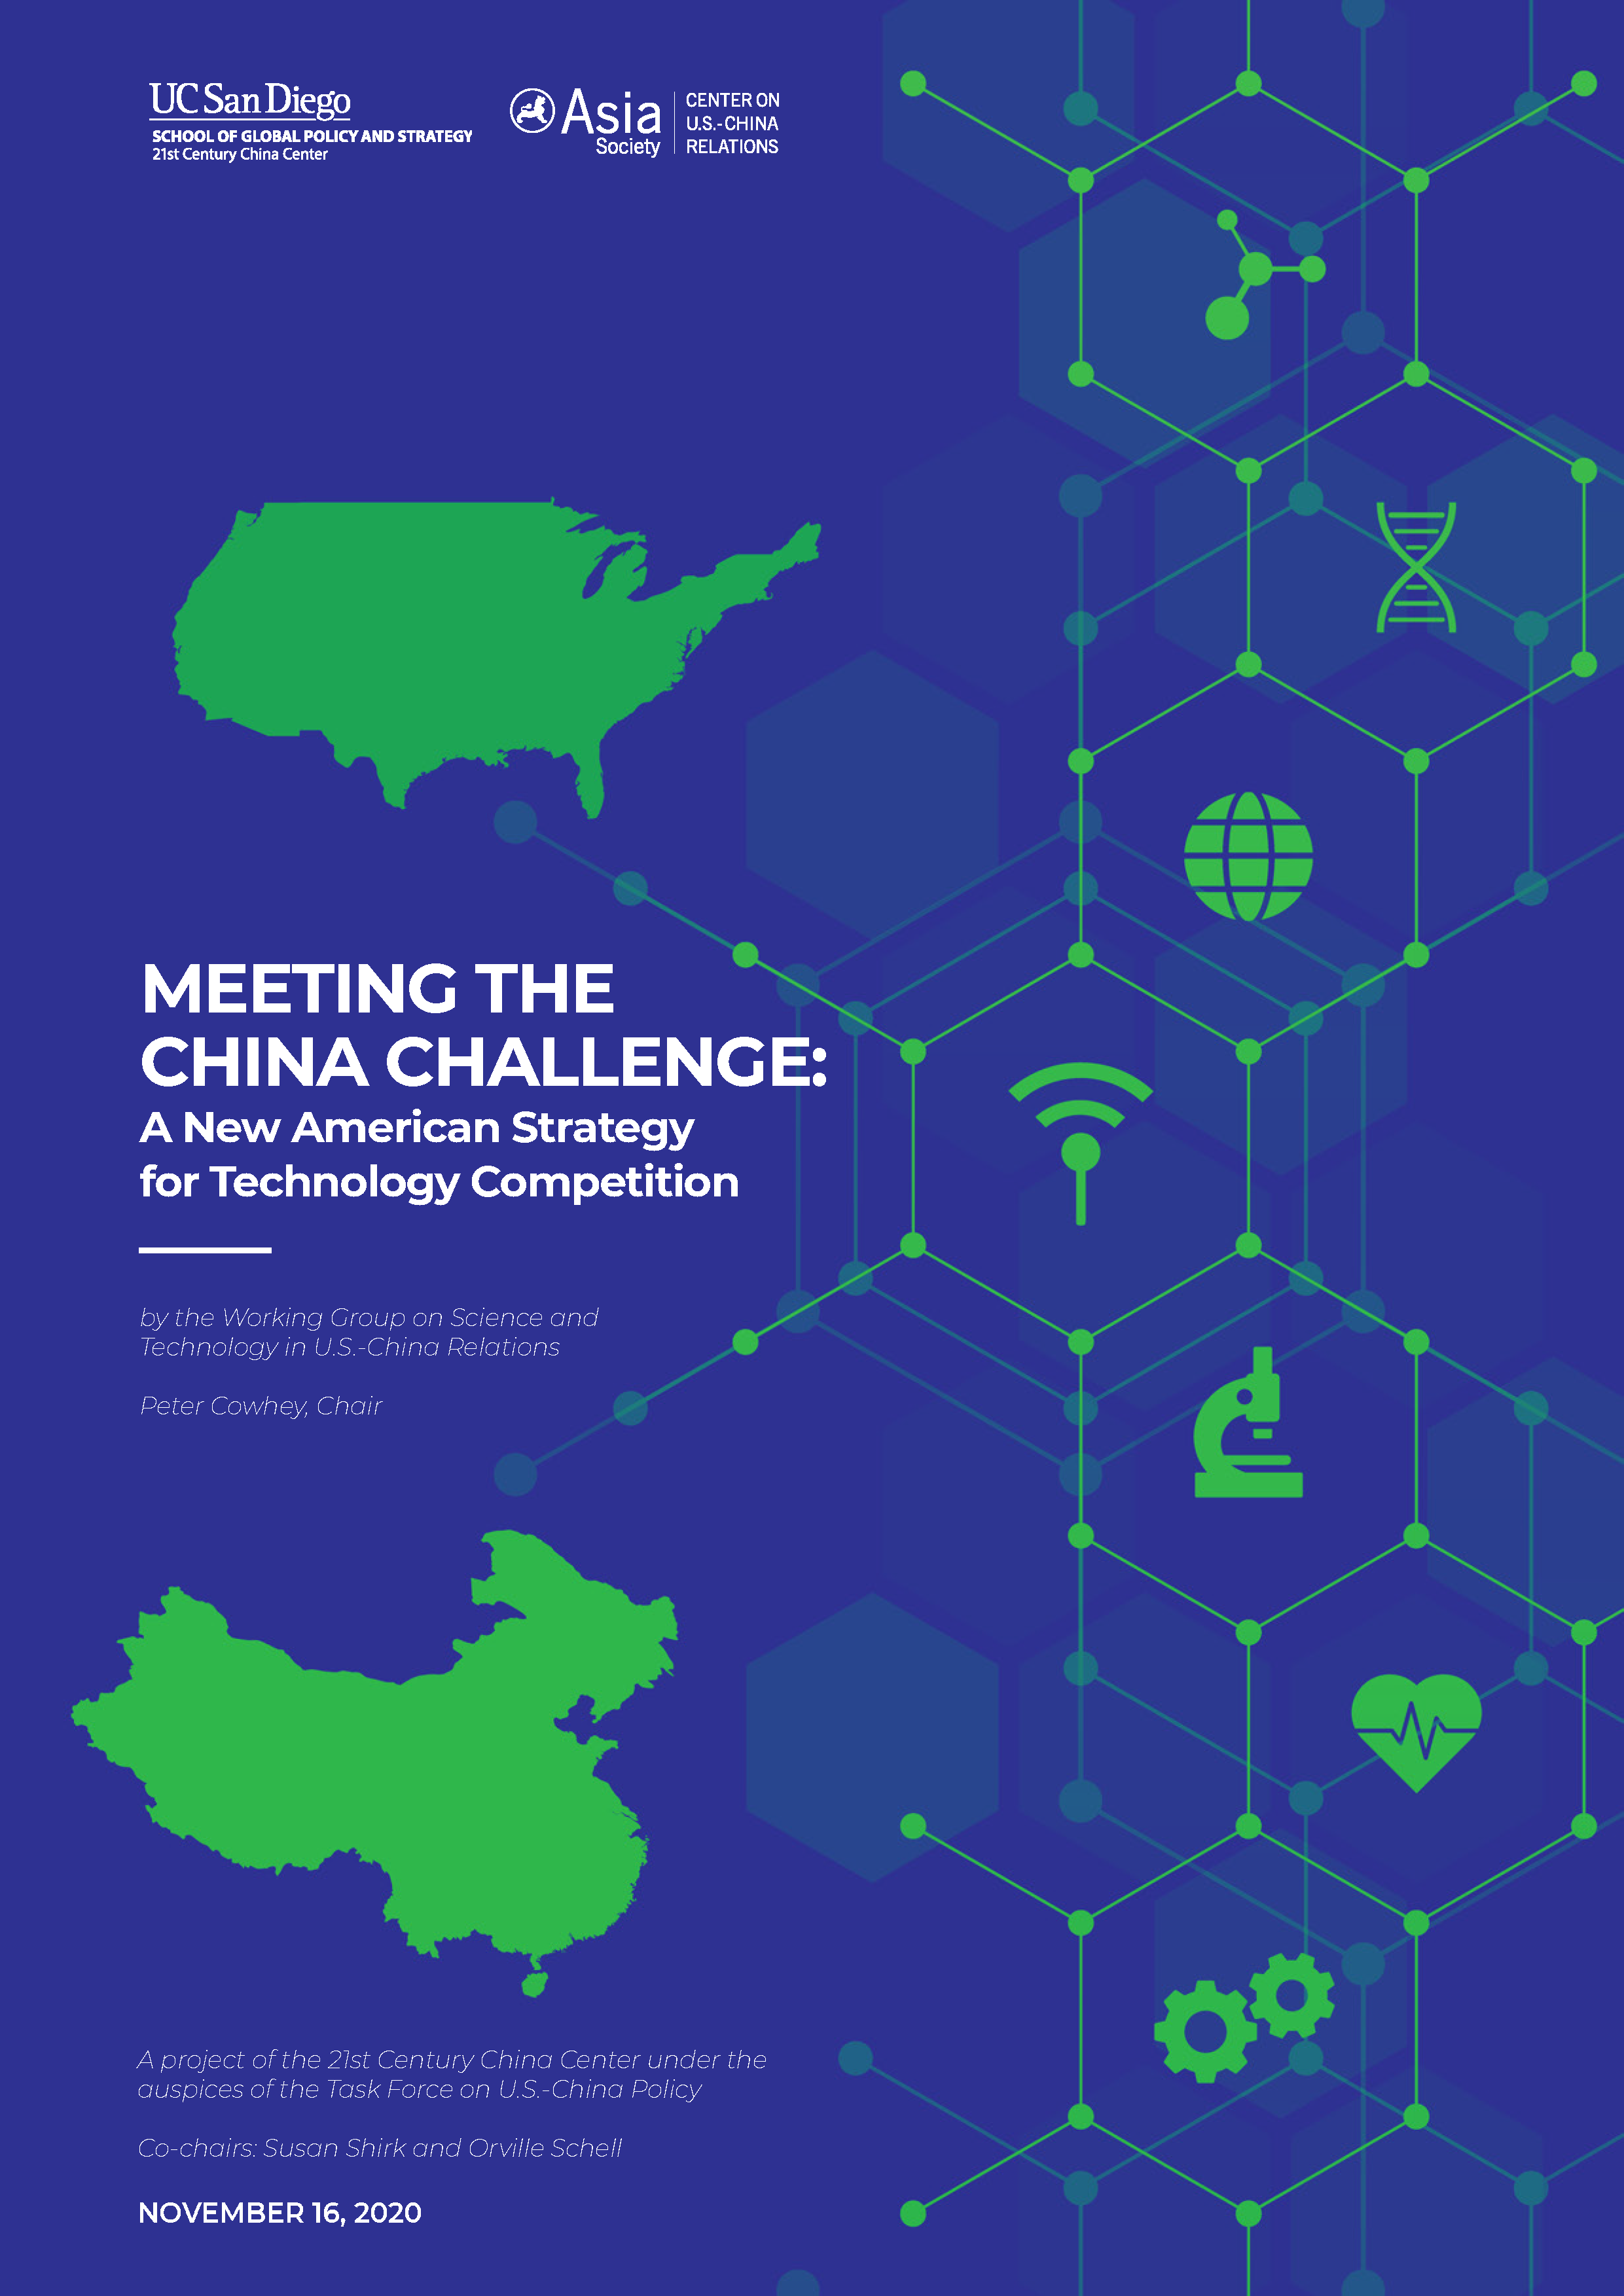  Meeting the China Challenge: A New American Strategy for Technology Competition